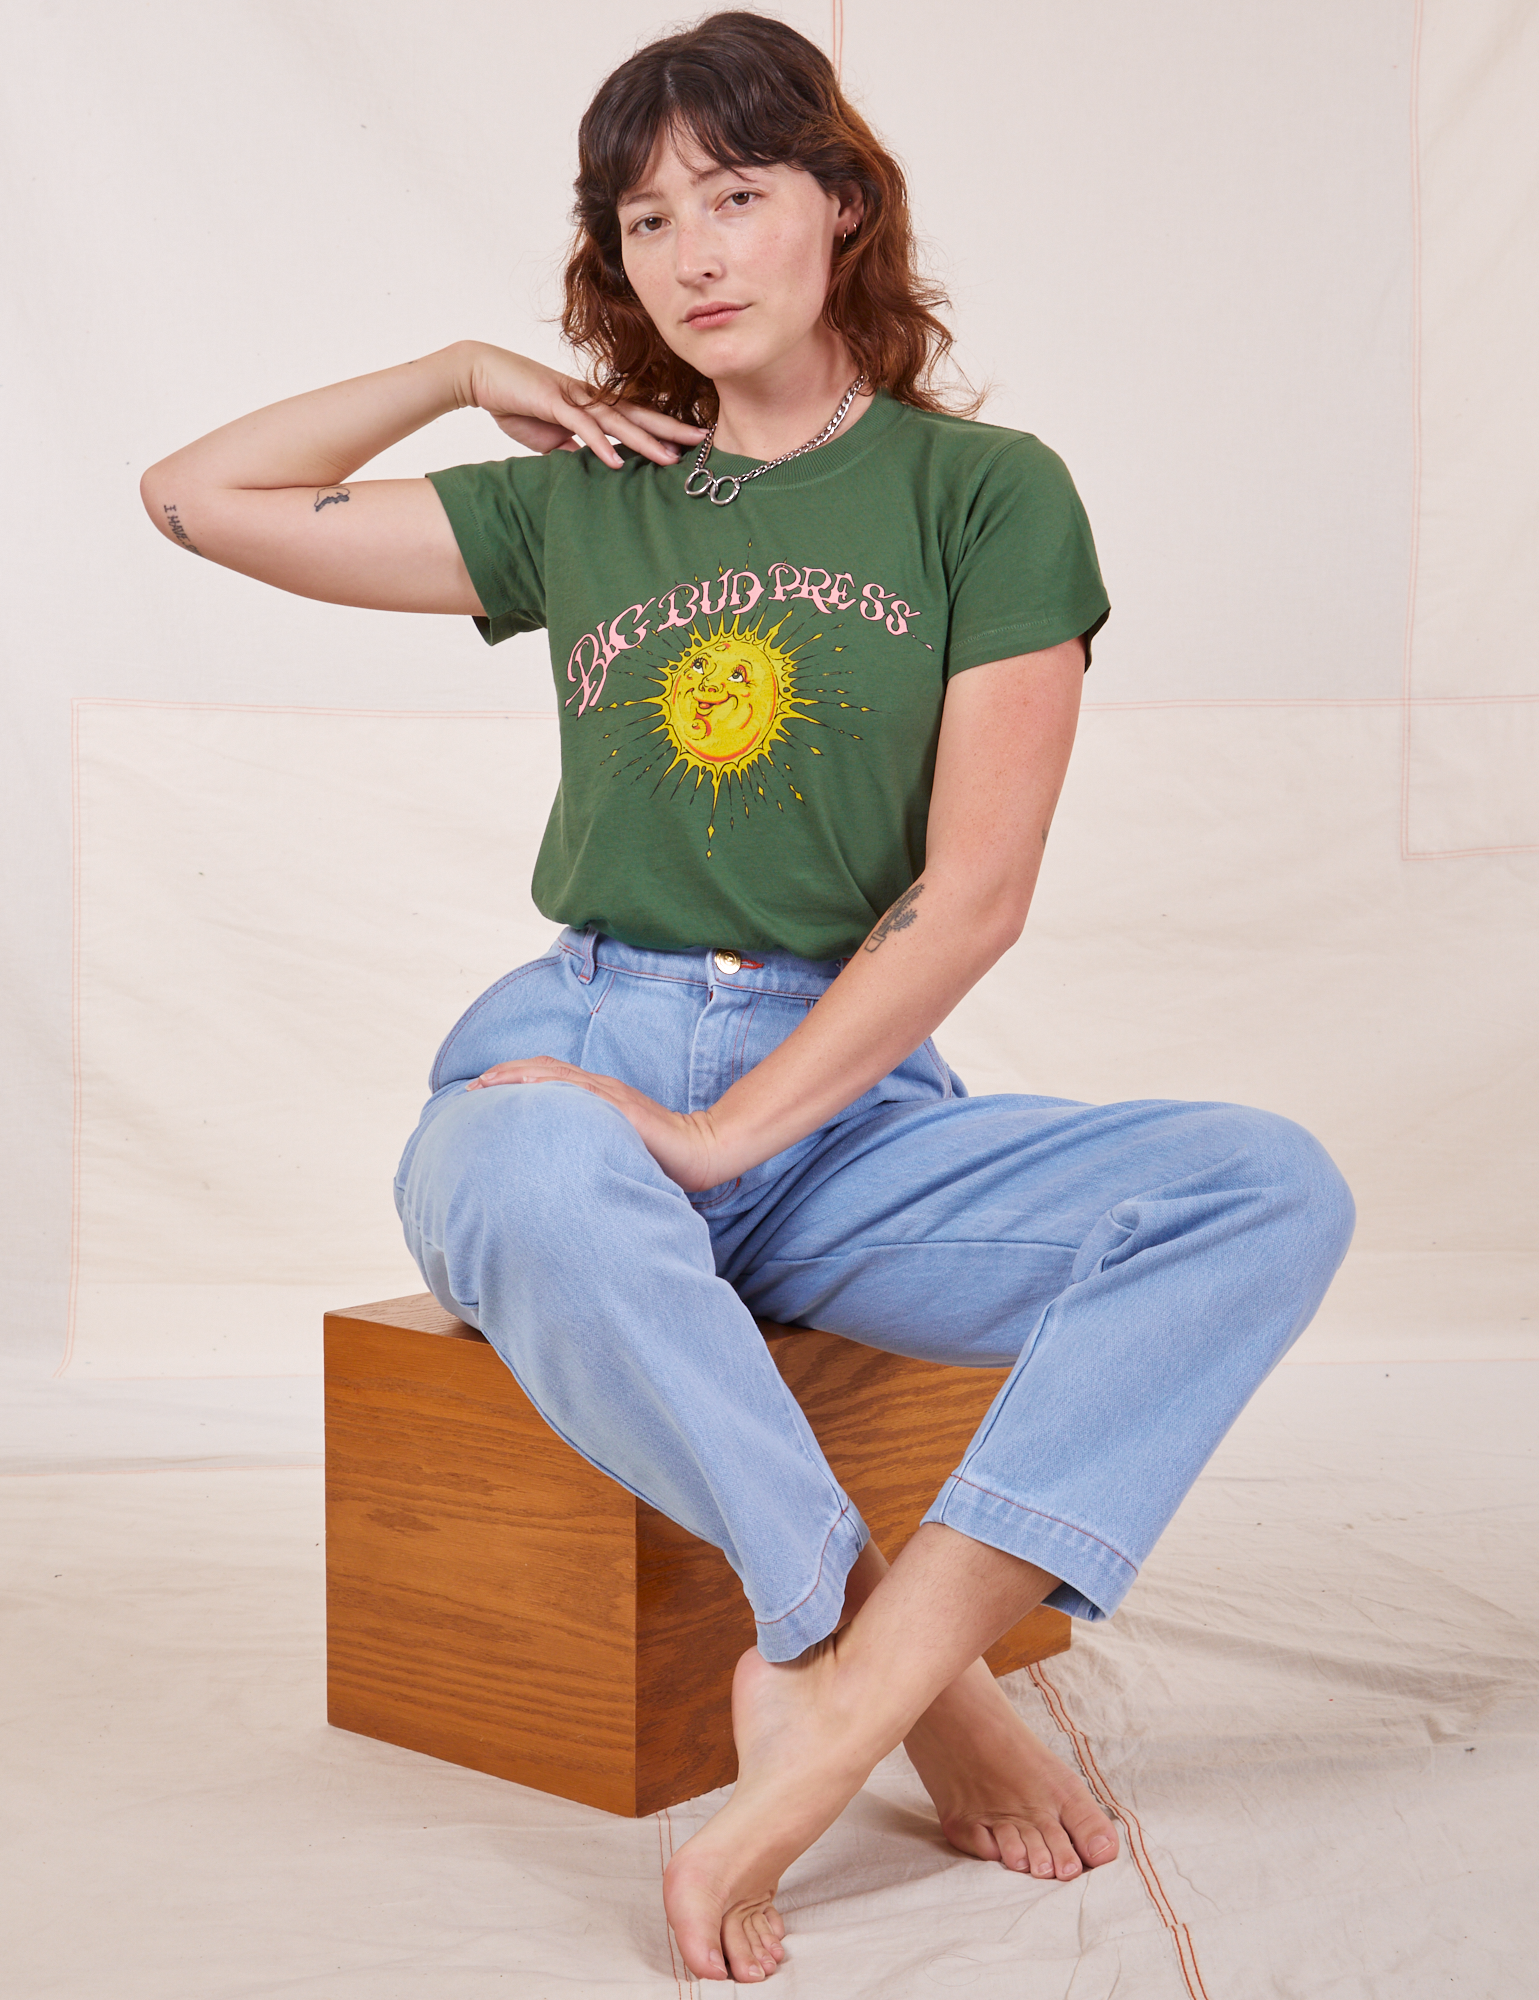 Alex is wearing Sun Baby Organic Tee in Dark Emerald Green and light wash Trouser Jeans.